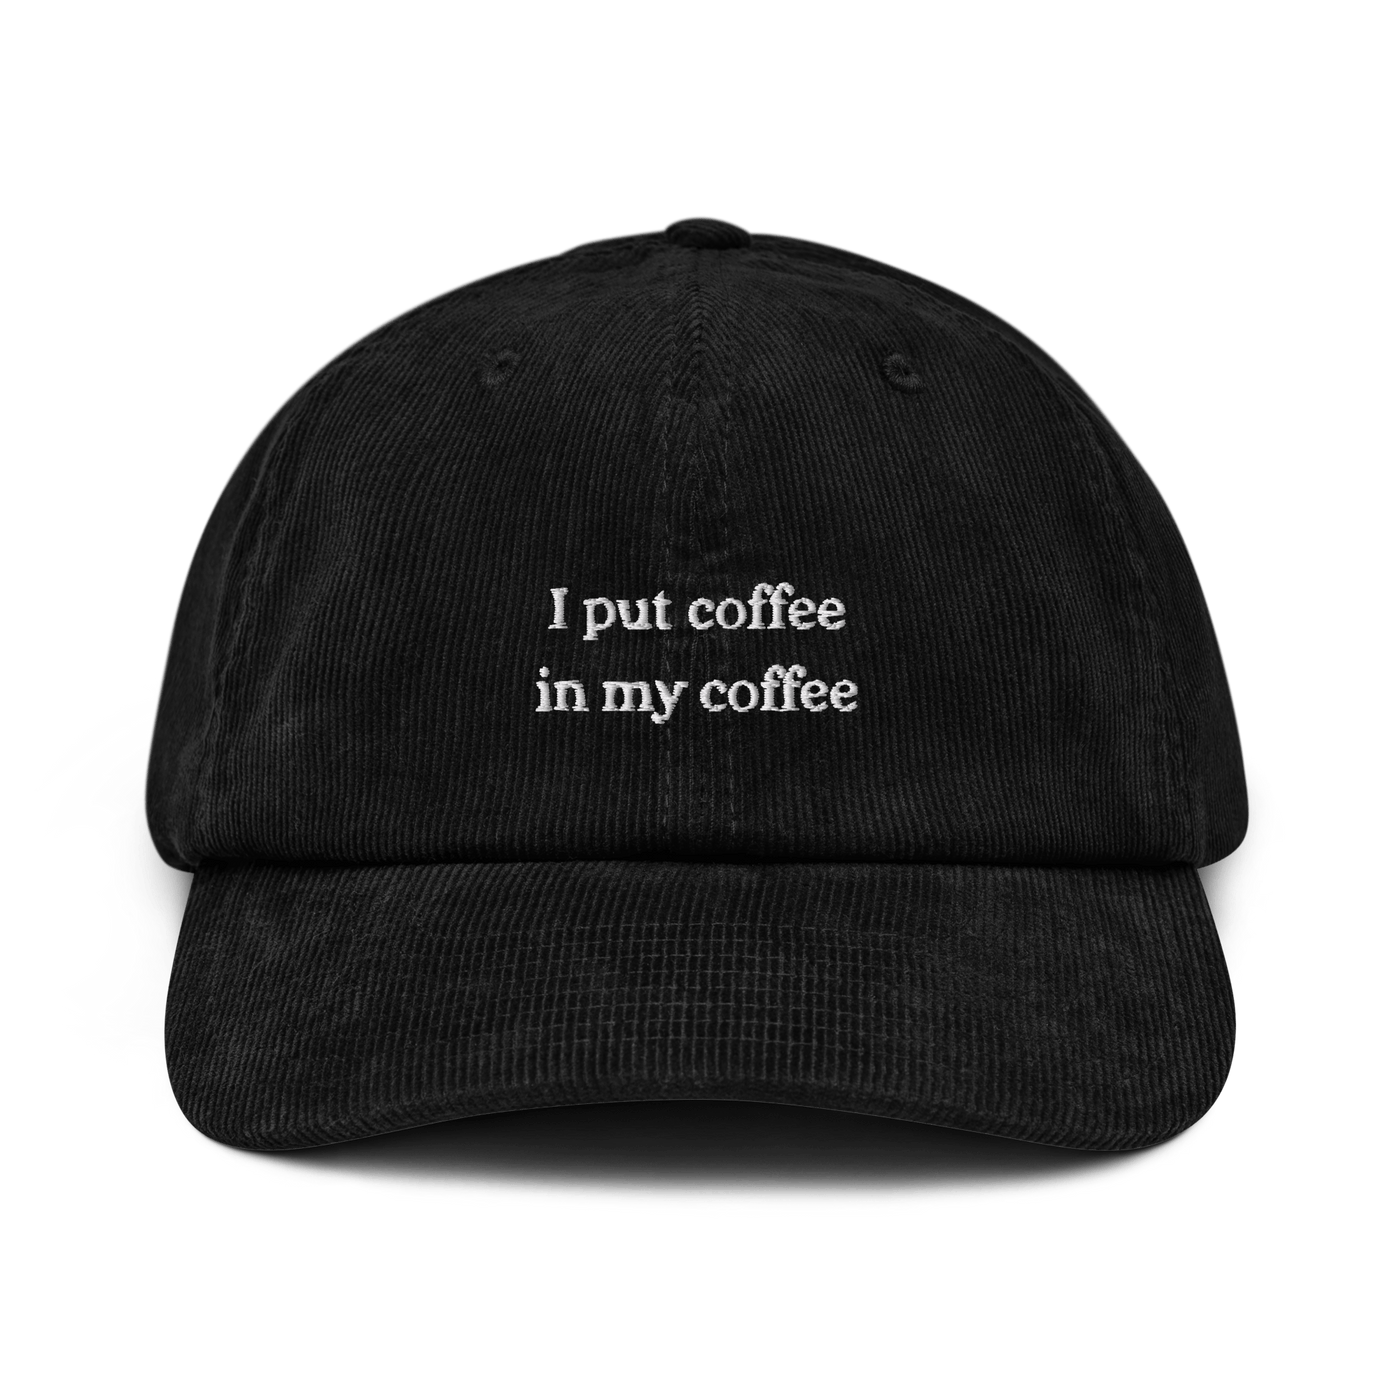 I put coffee in my coffee Corduroy hat - Black - - Just Another Cap Store